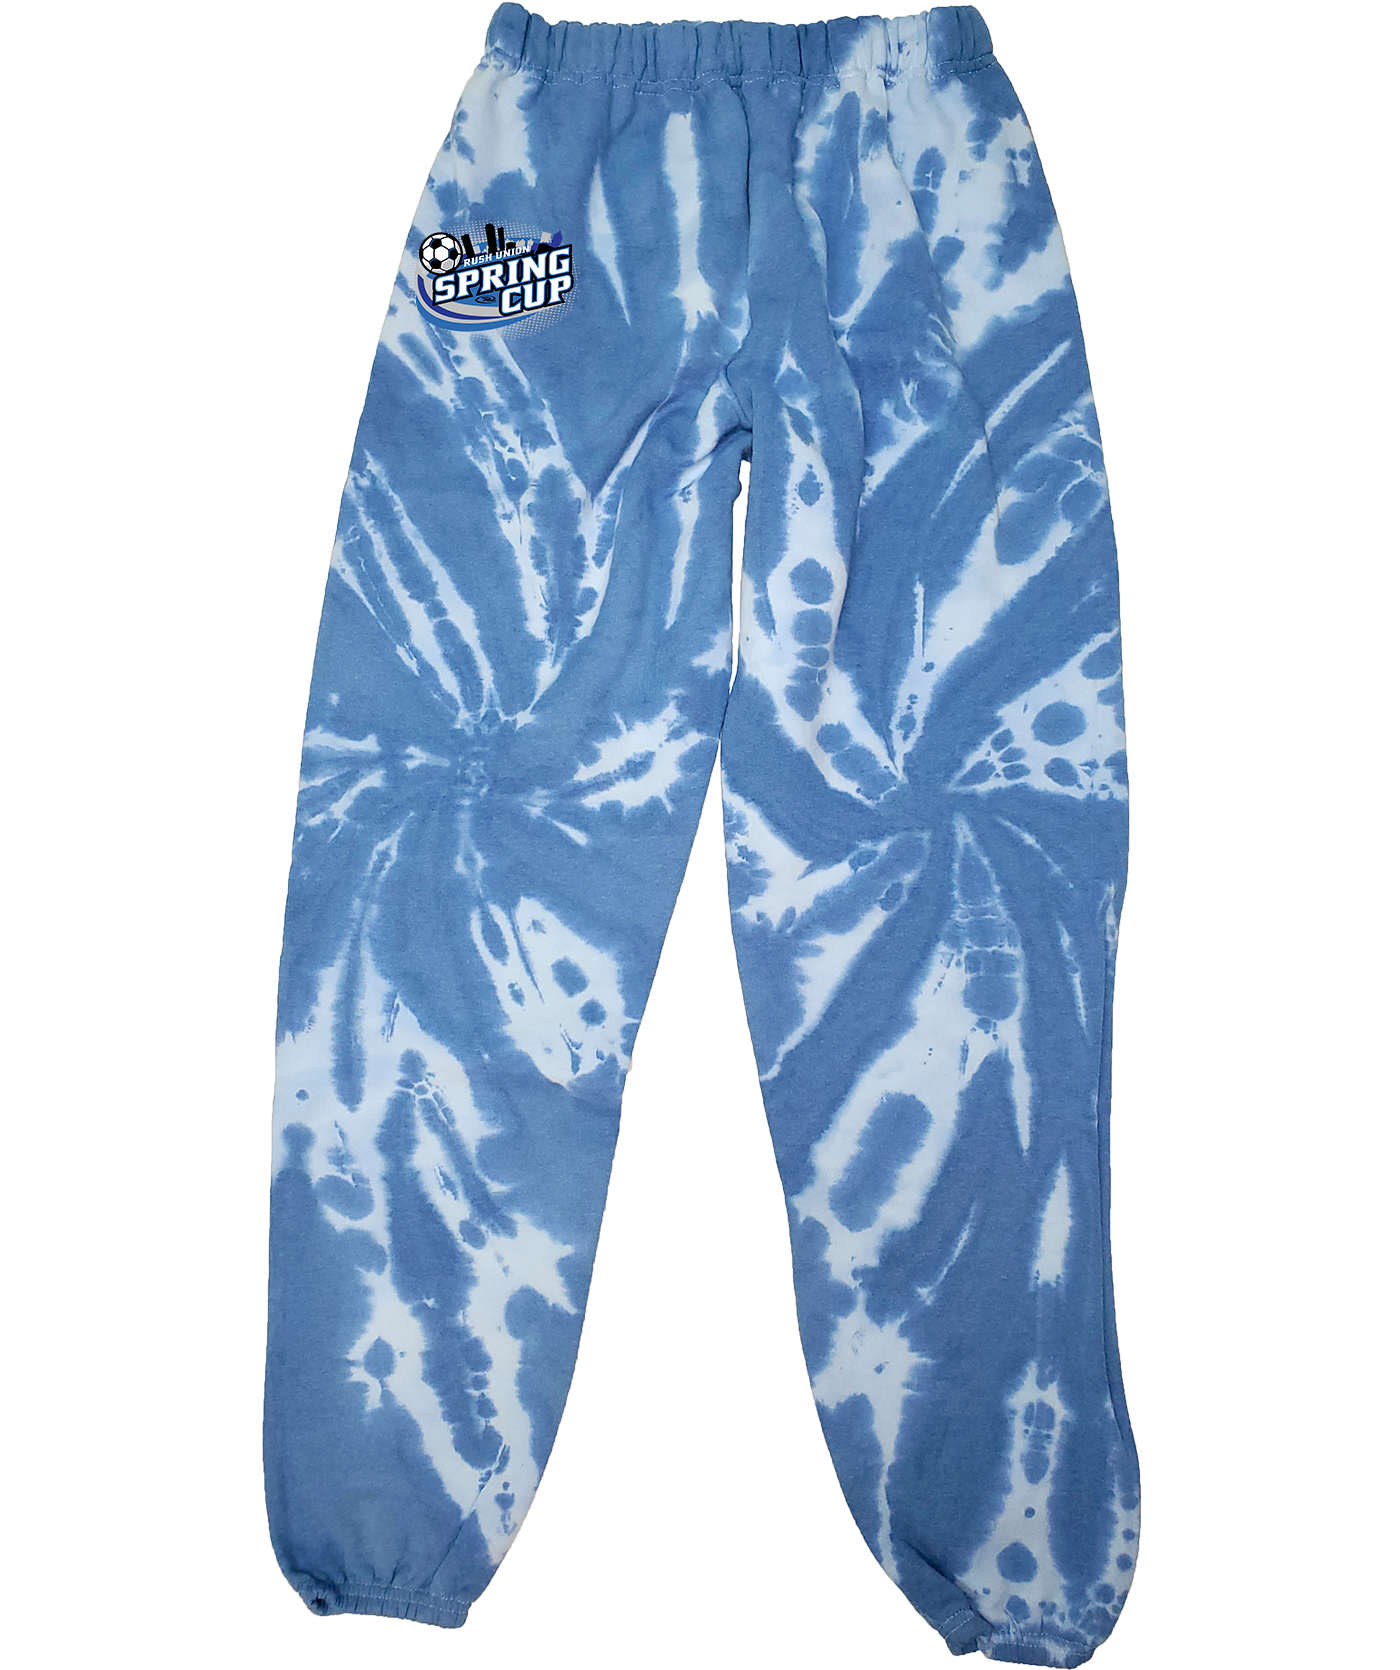 SWEAT PANTS - 2023 Rush Union Spring Cup